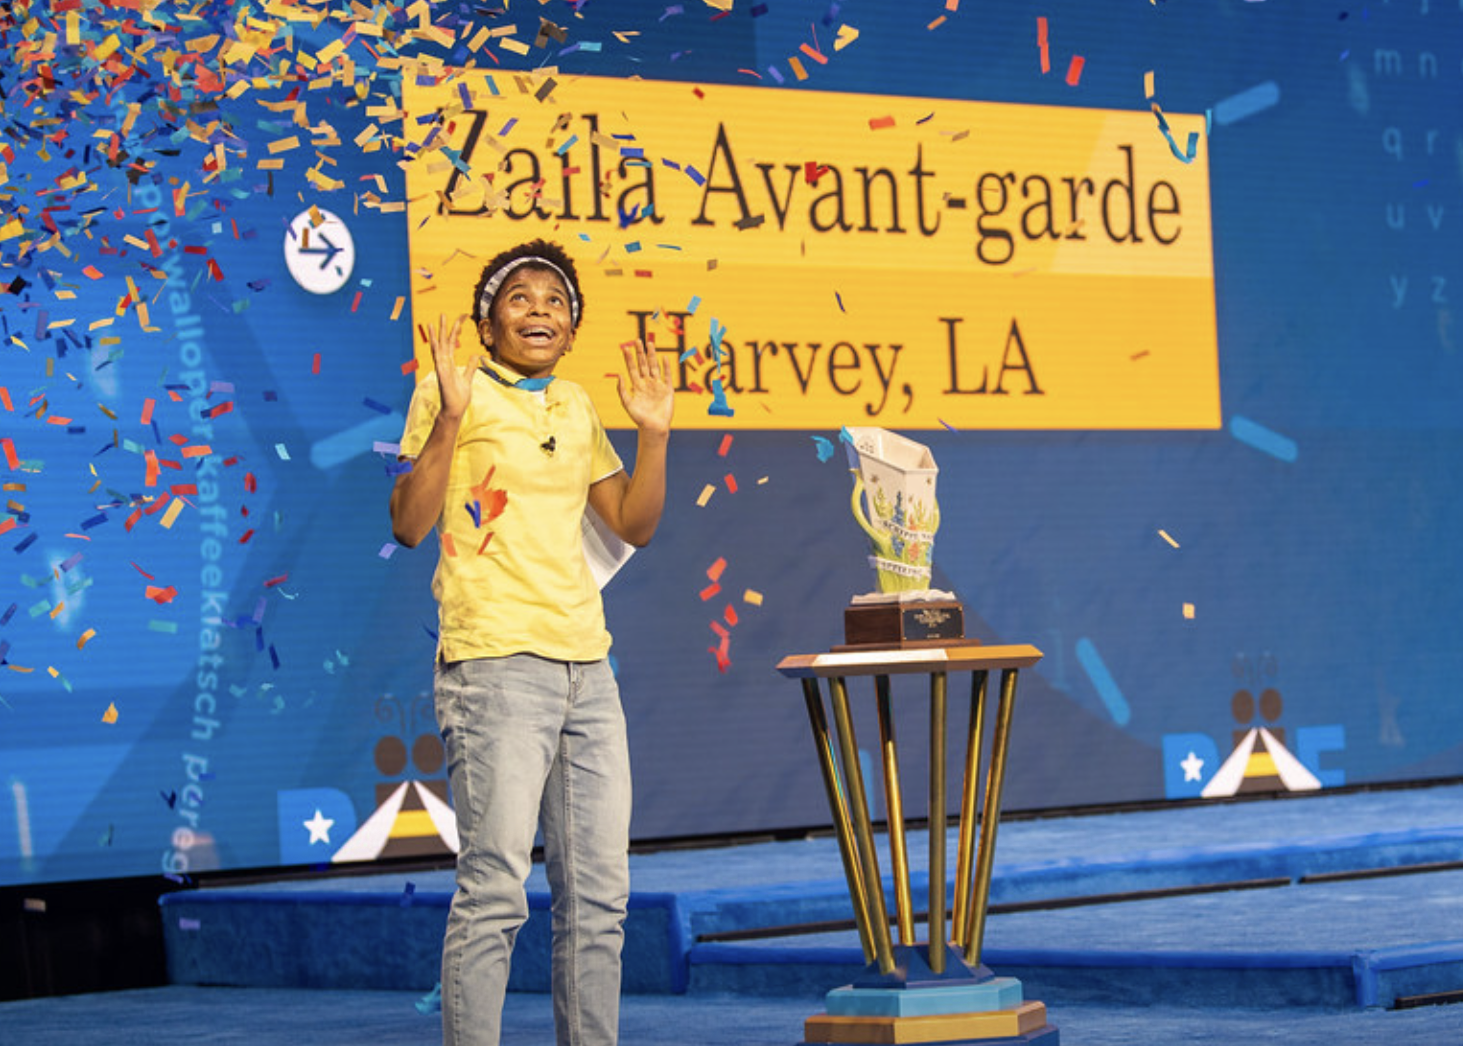 2021 Scripps National Spelling Bee champion Zaila Avant-garde standing onstage as confetti falls from the ceiling following her correct spelling of 